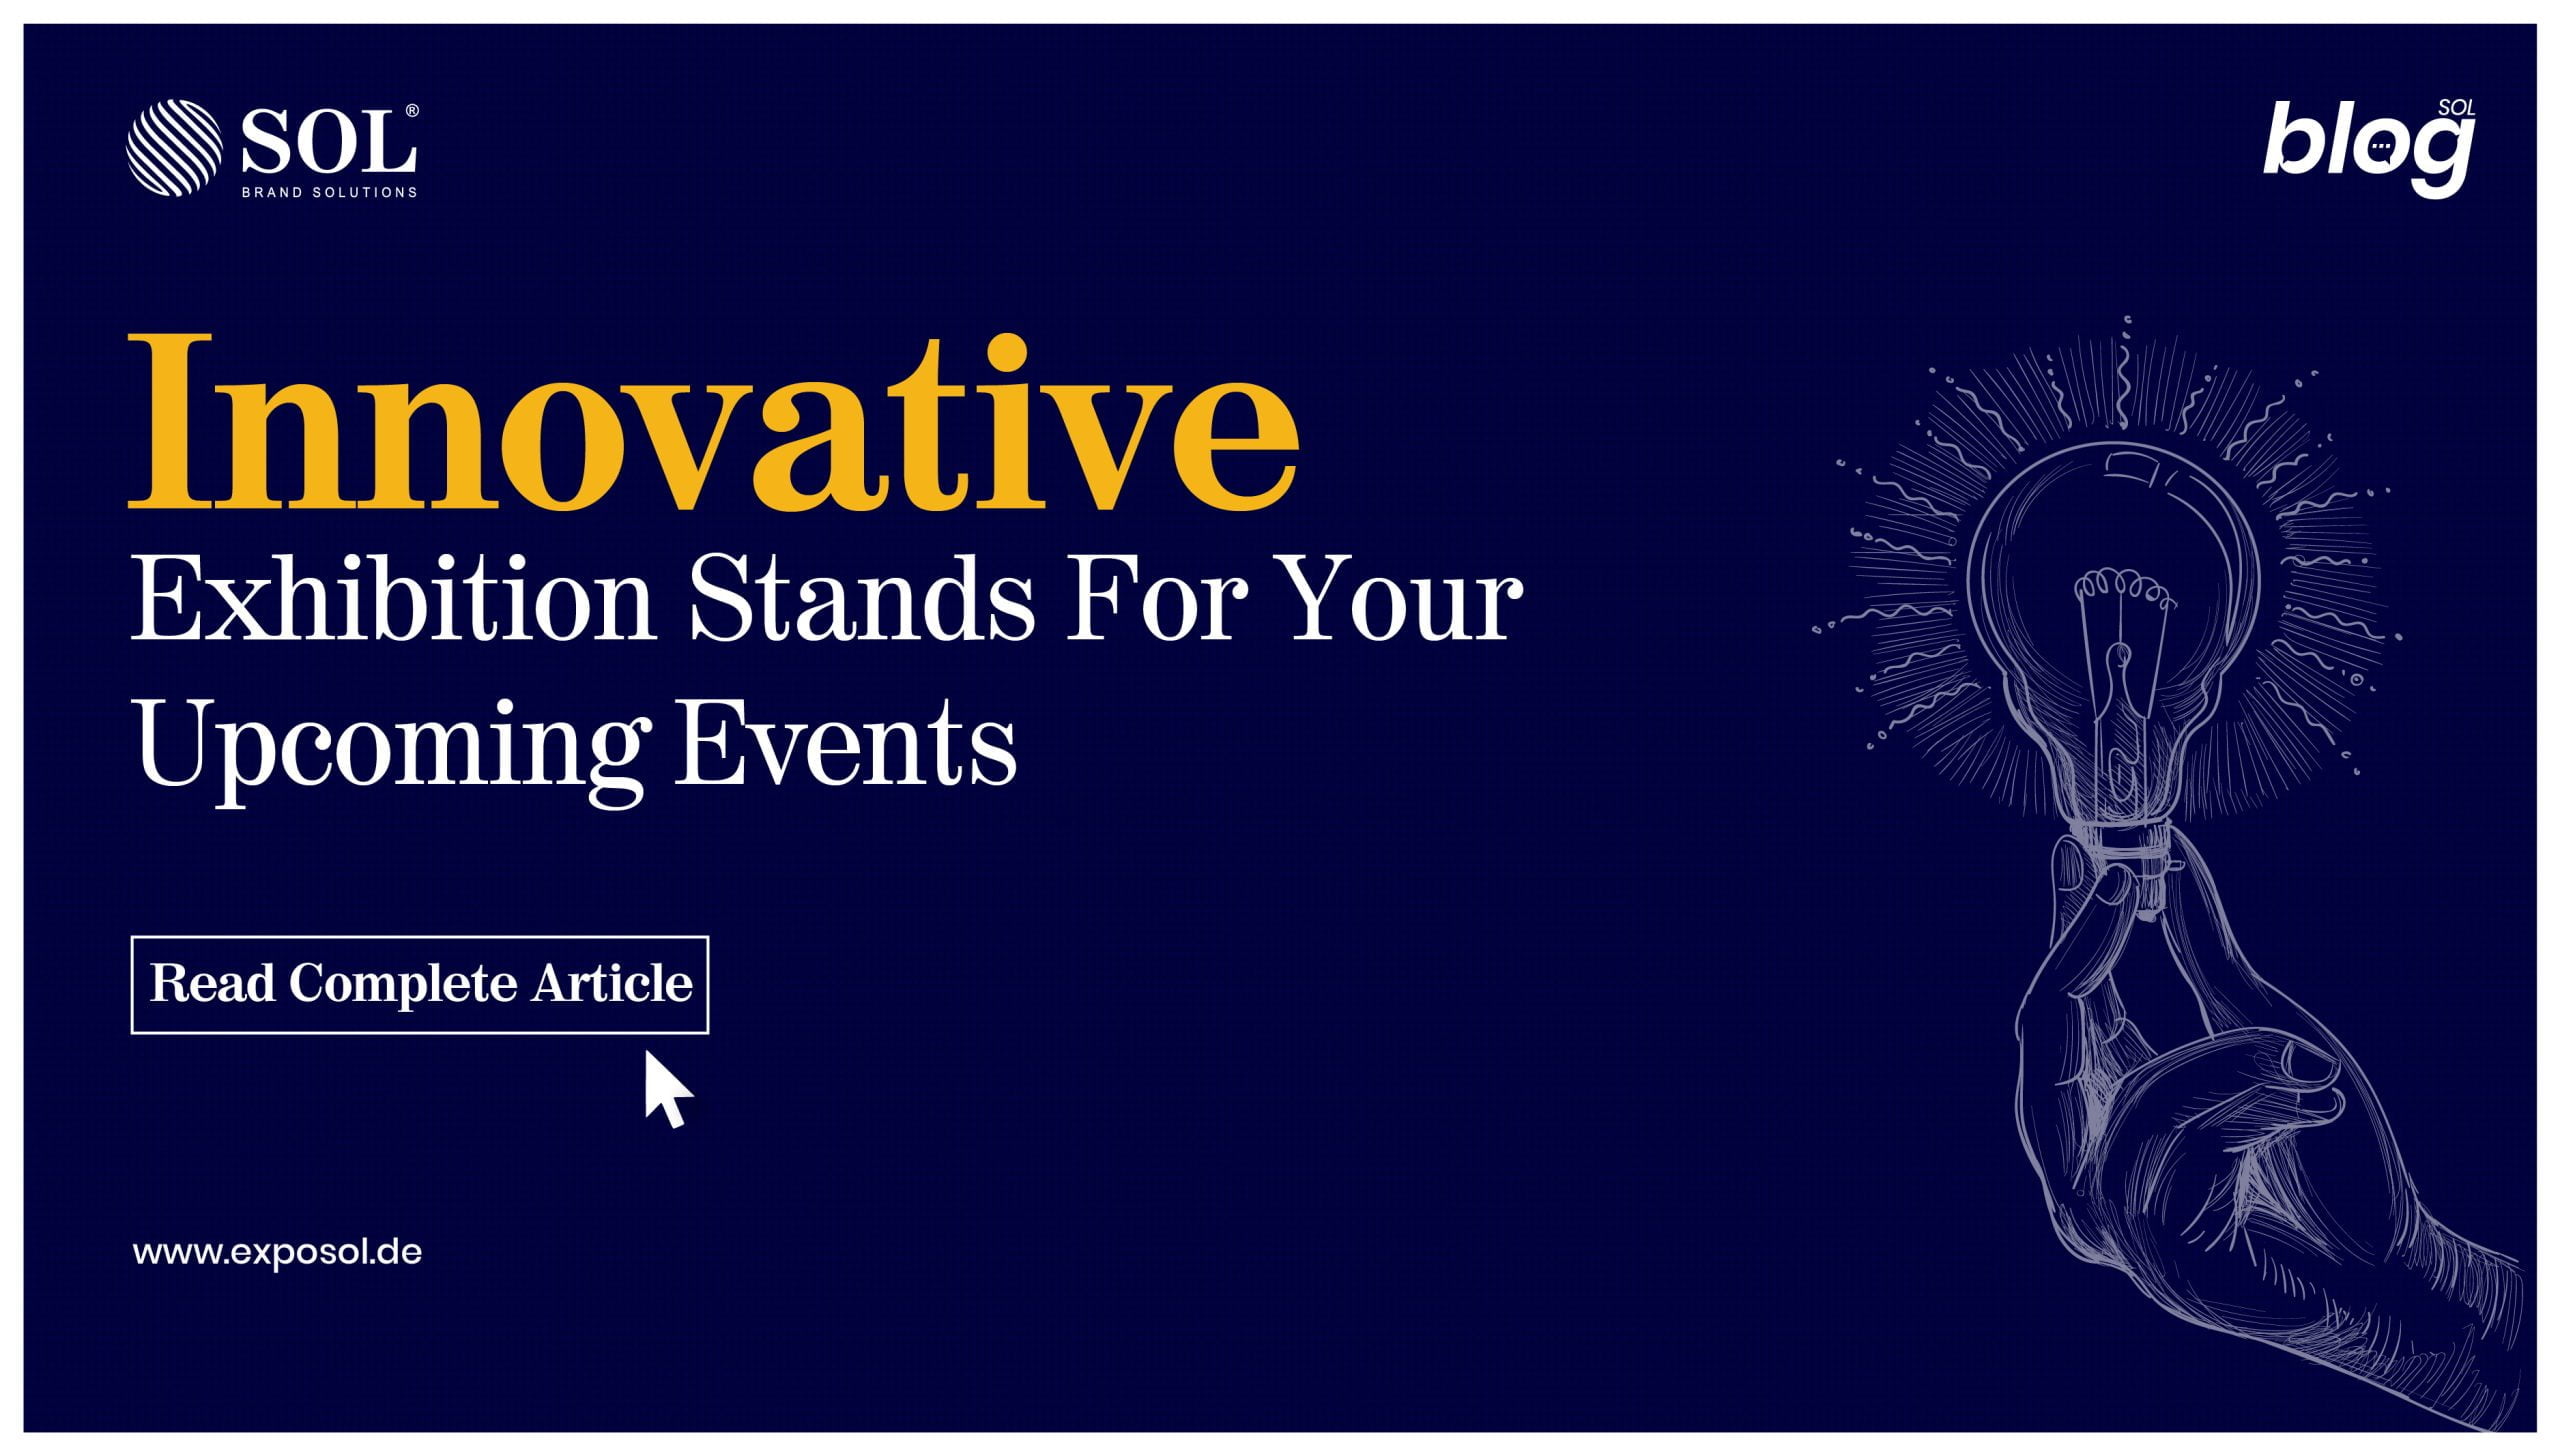 Innovative Exhibition Stands For Your Upcoming Events